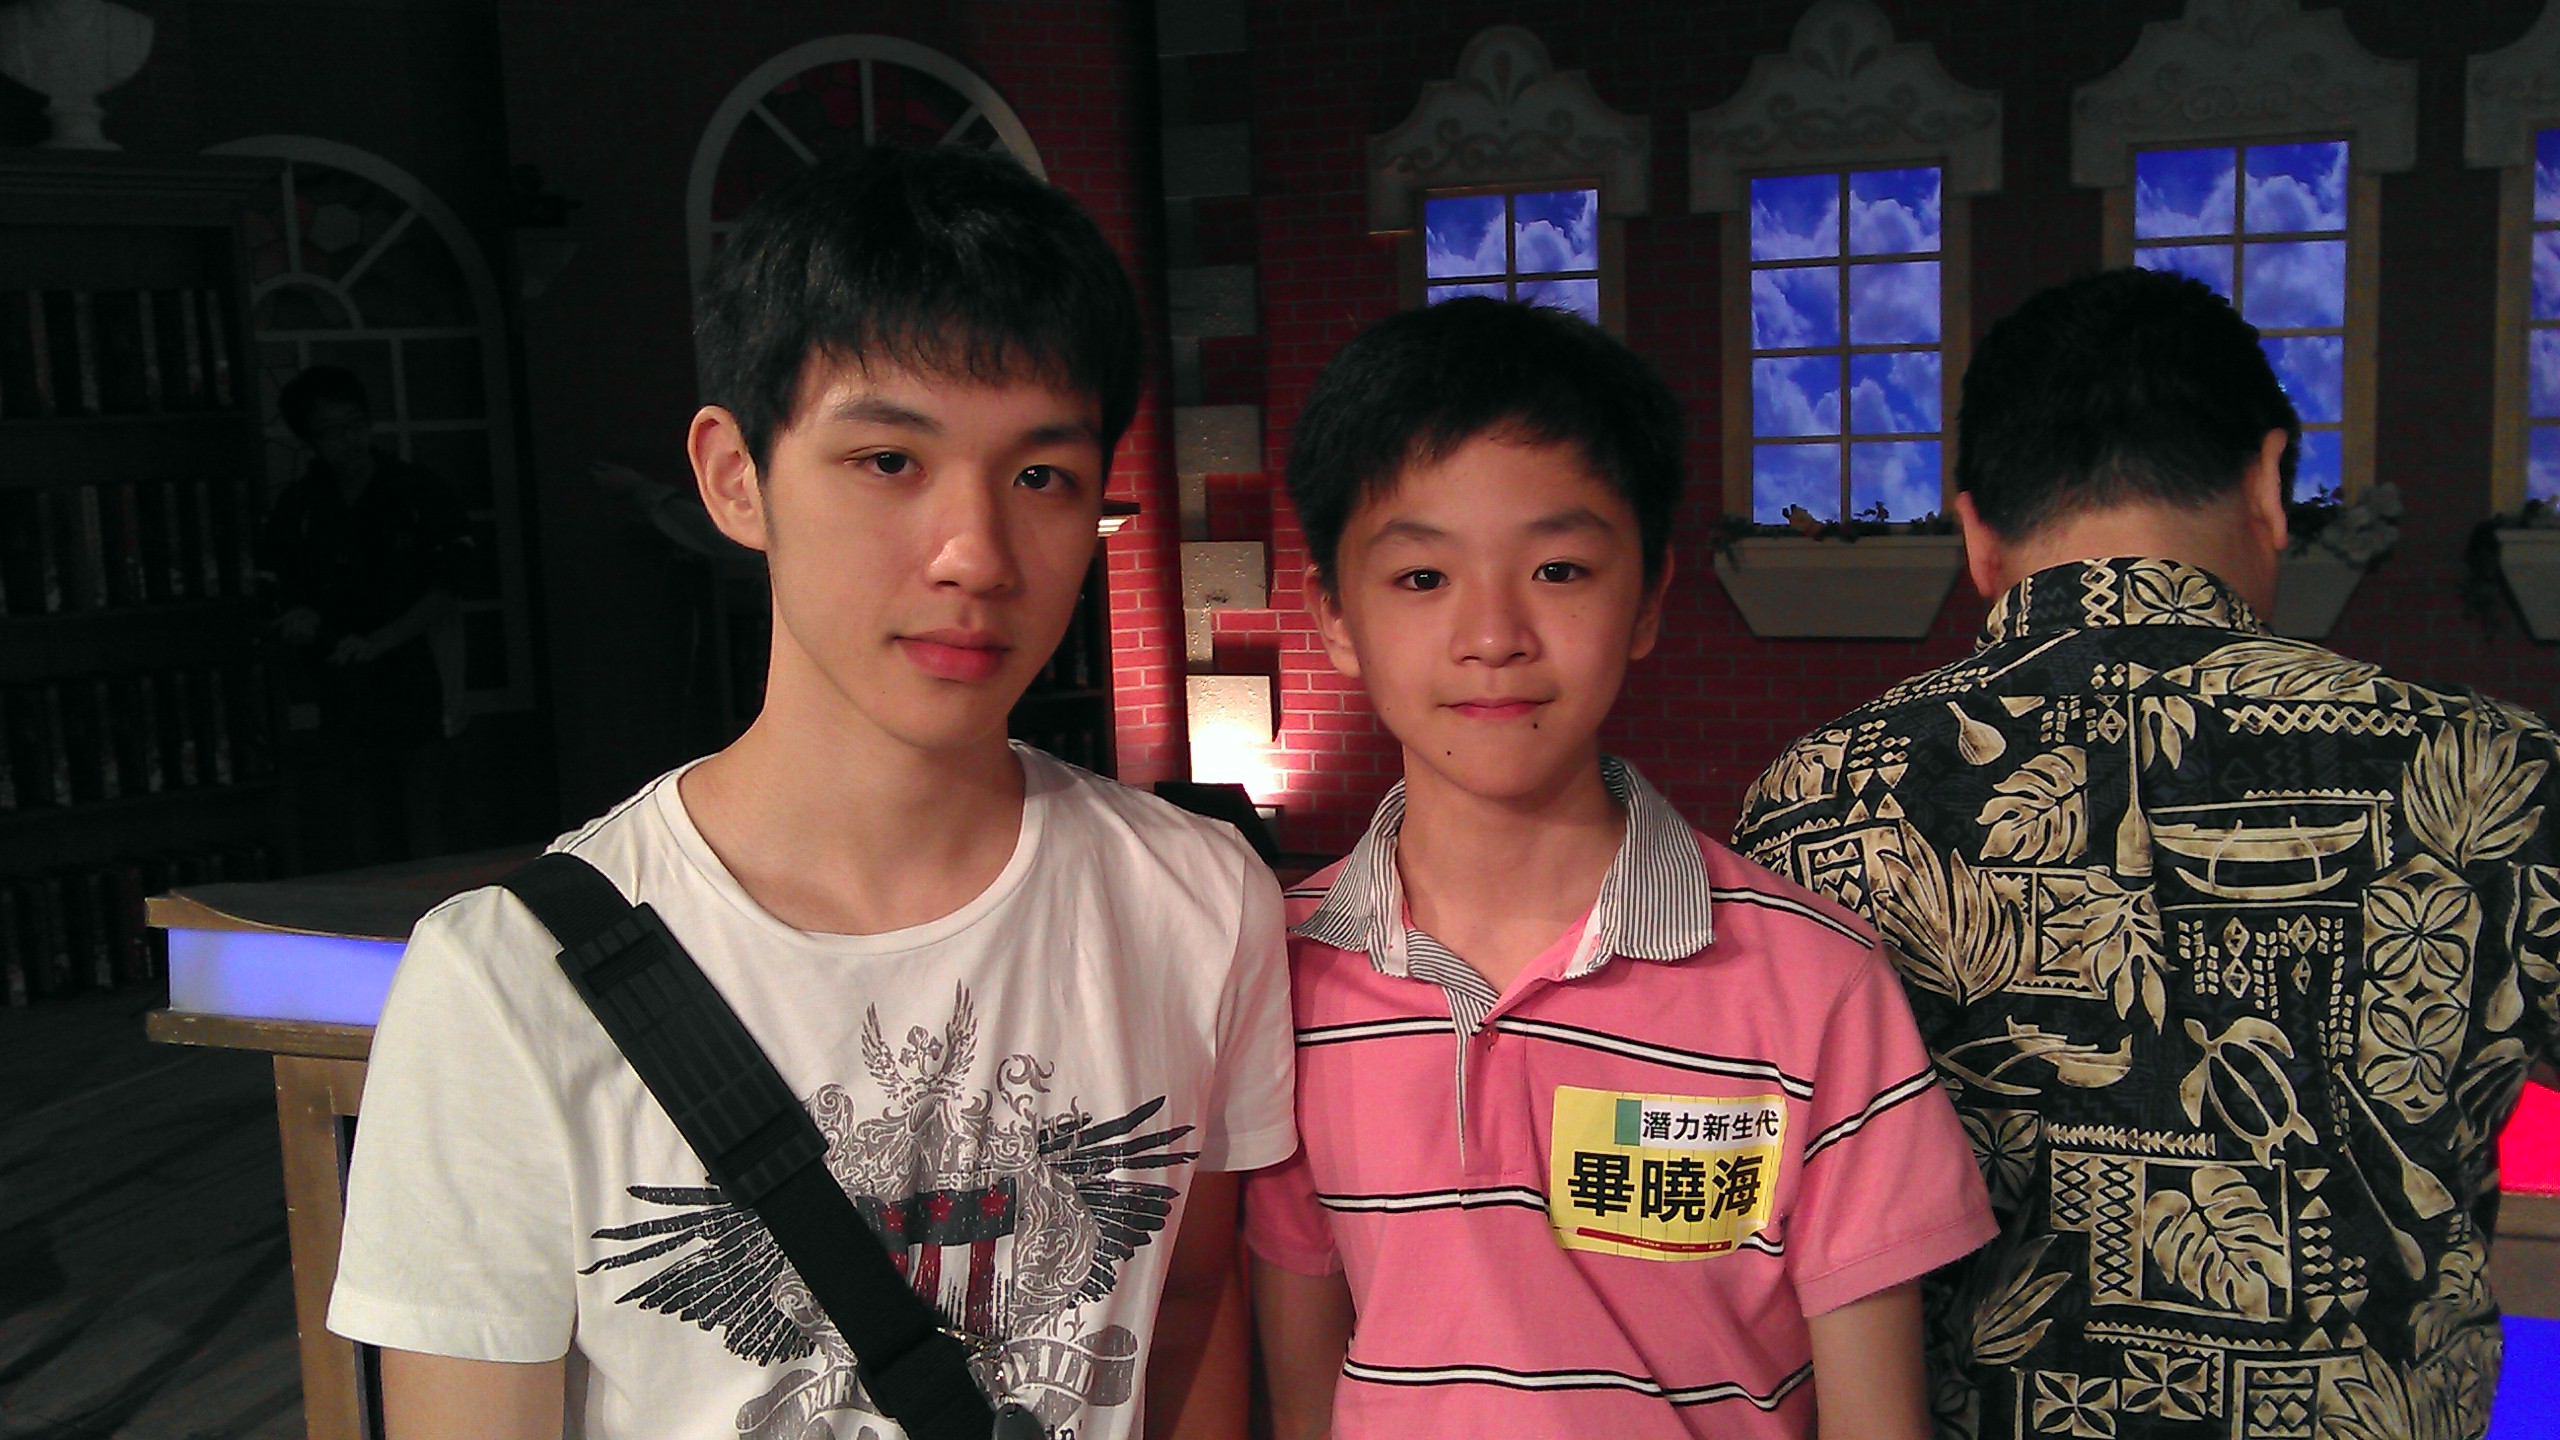 The firm actor Xiao-Hai Bi with his brother